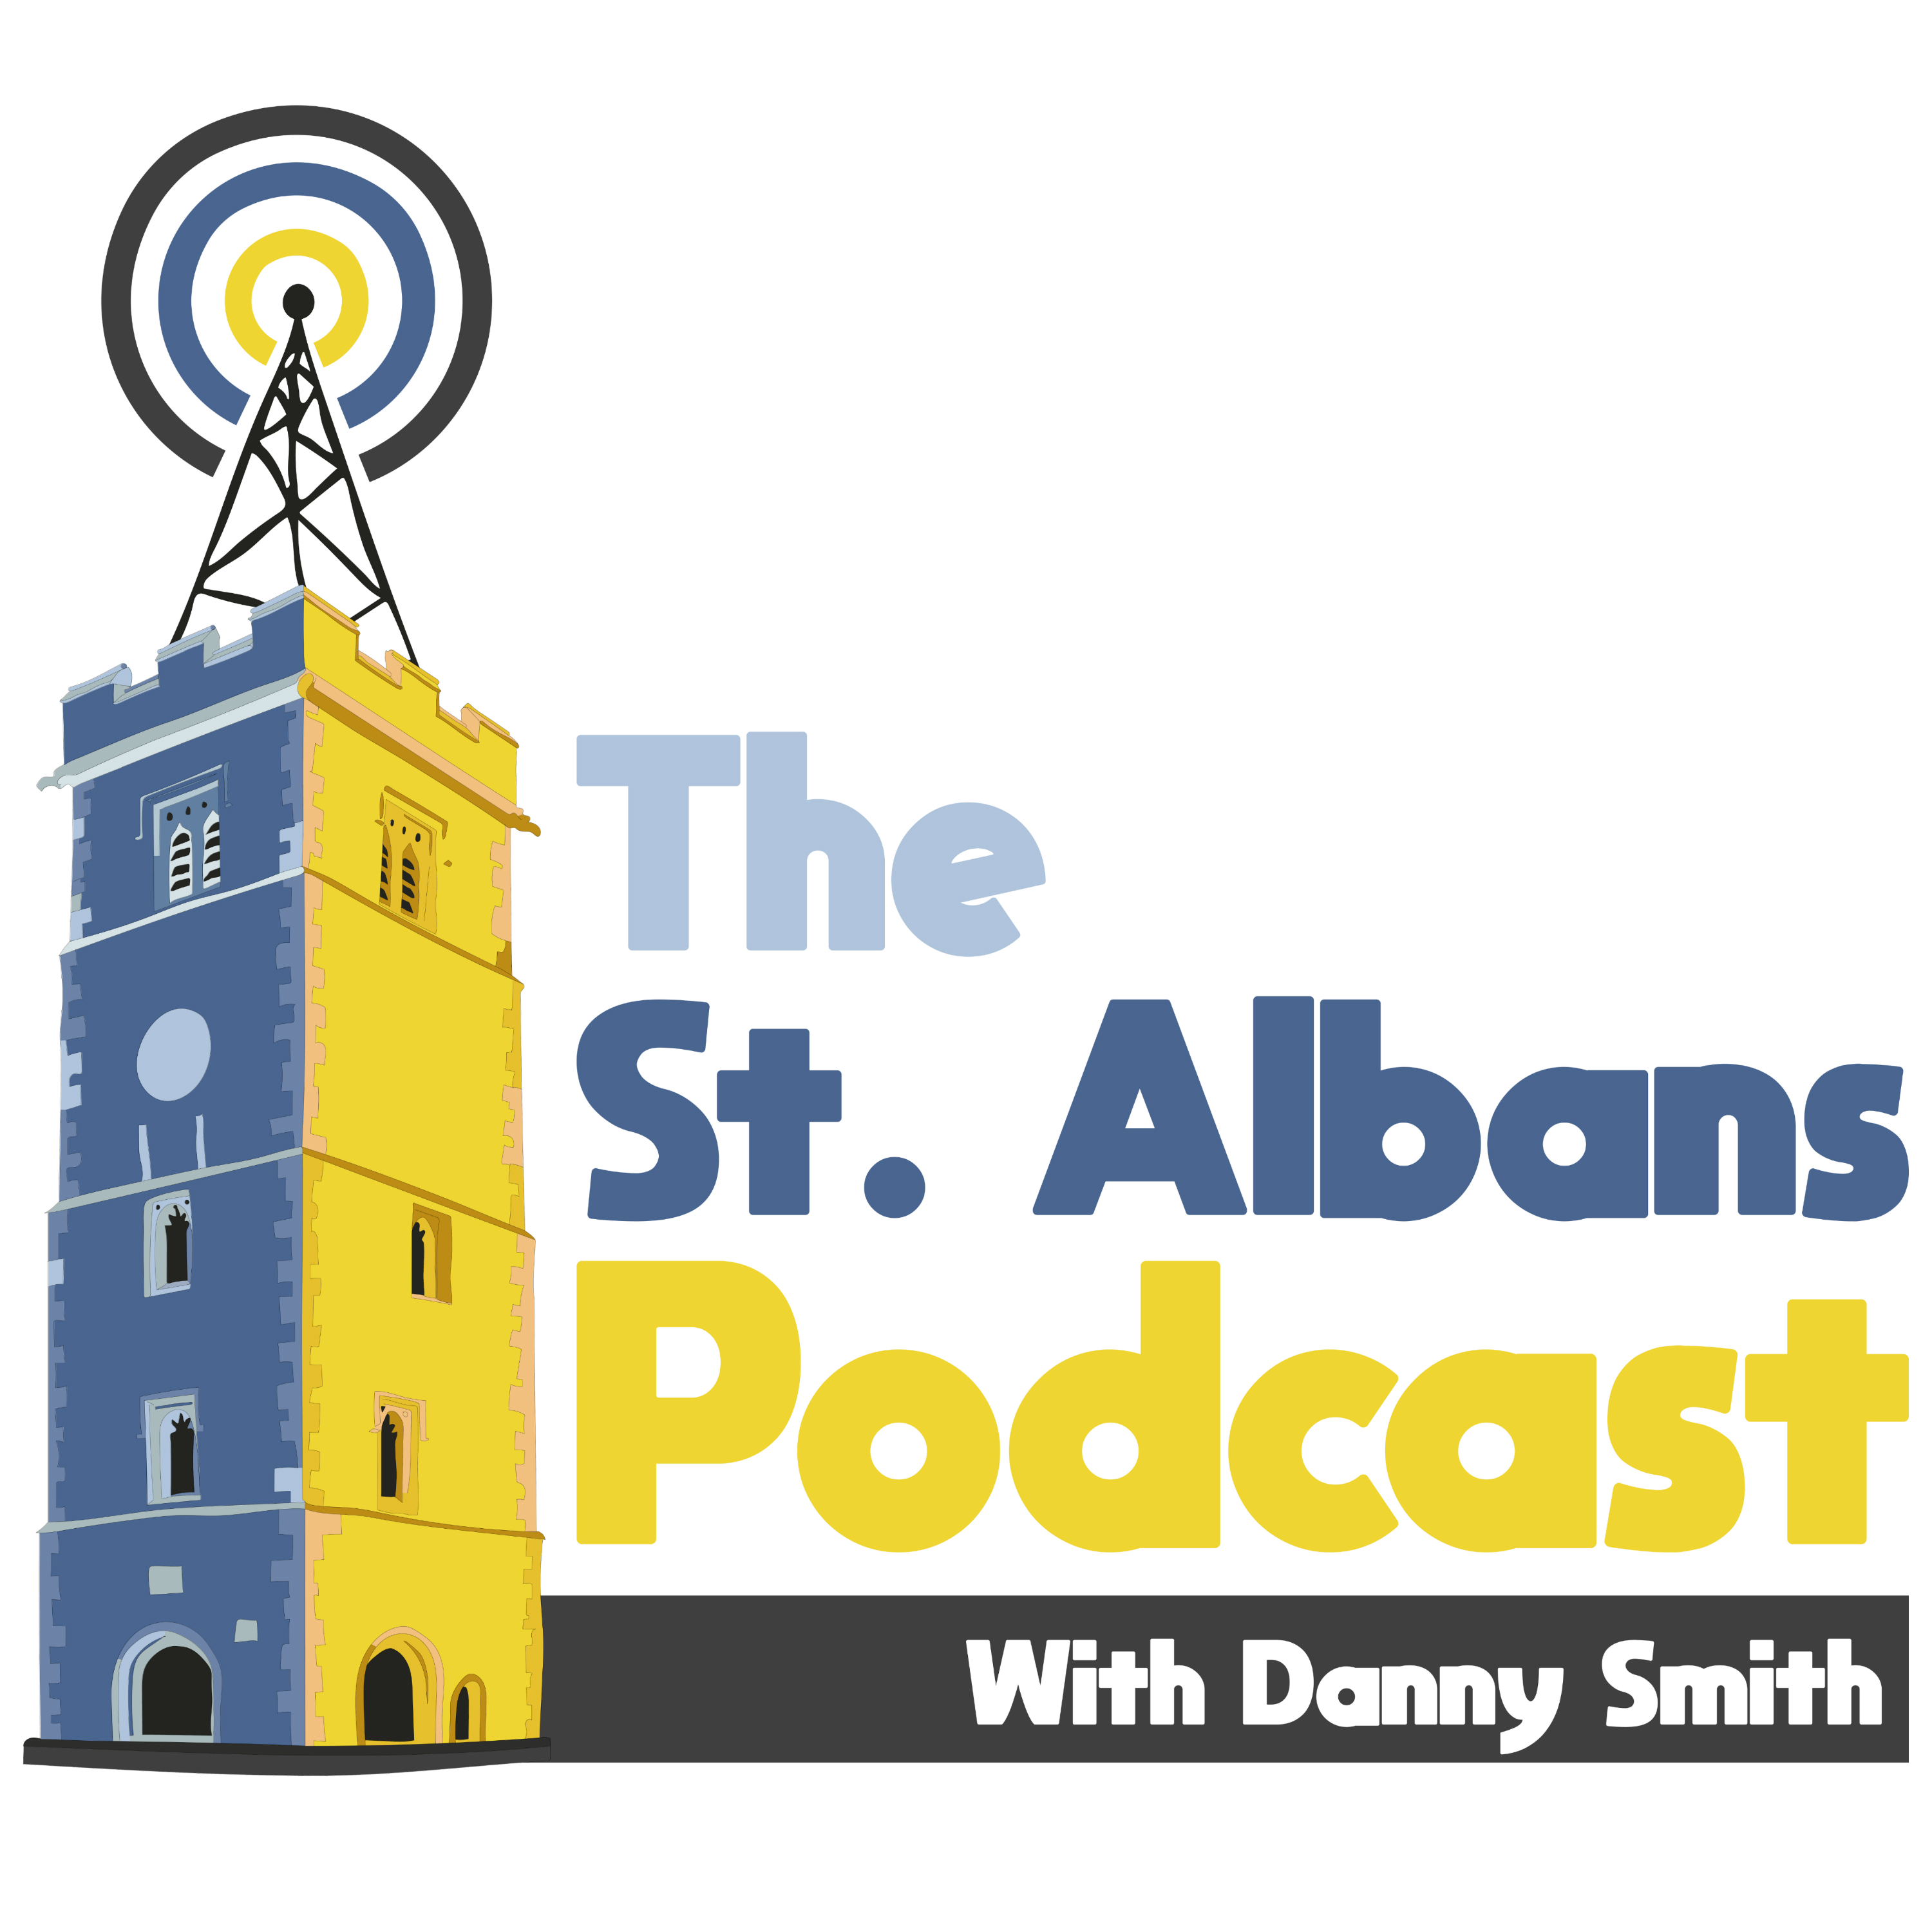 Podcast – St Albans Podcast with Danny Smith